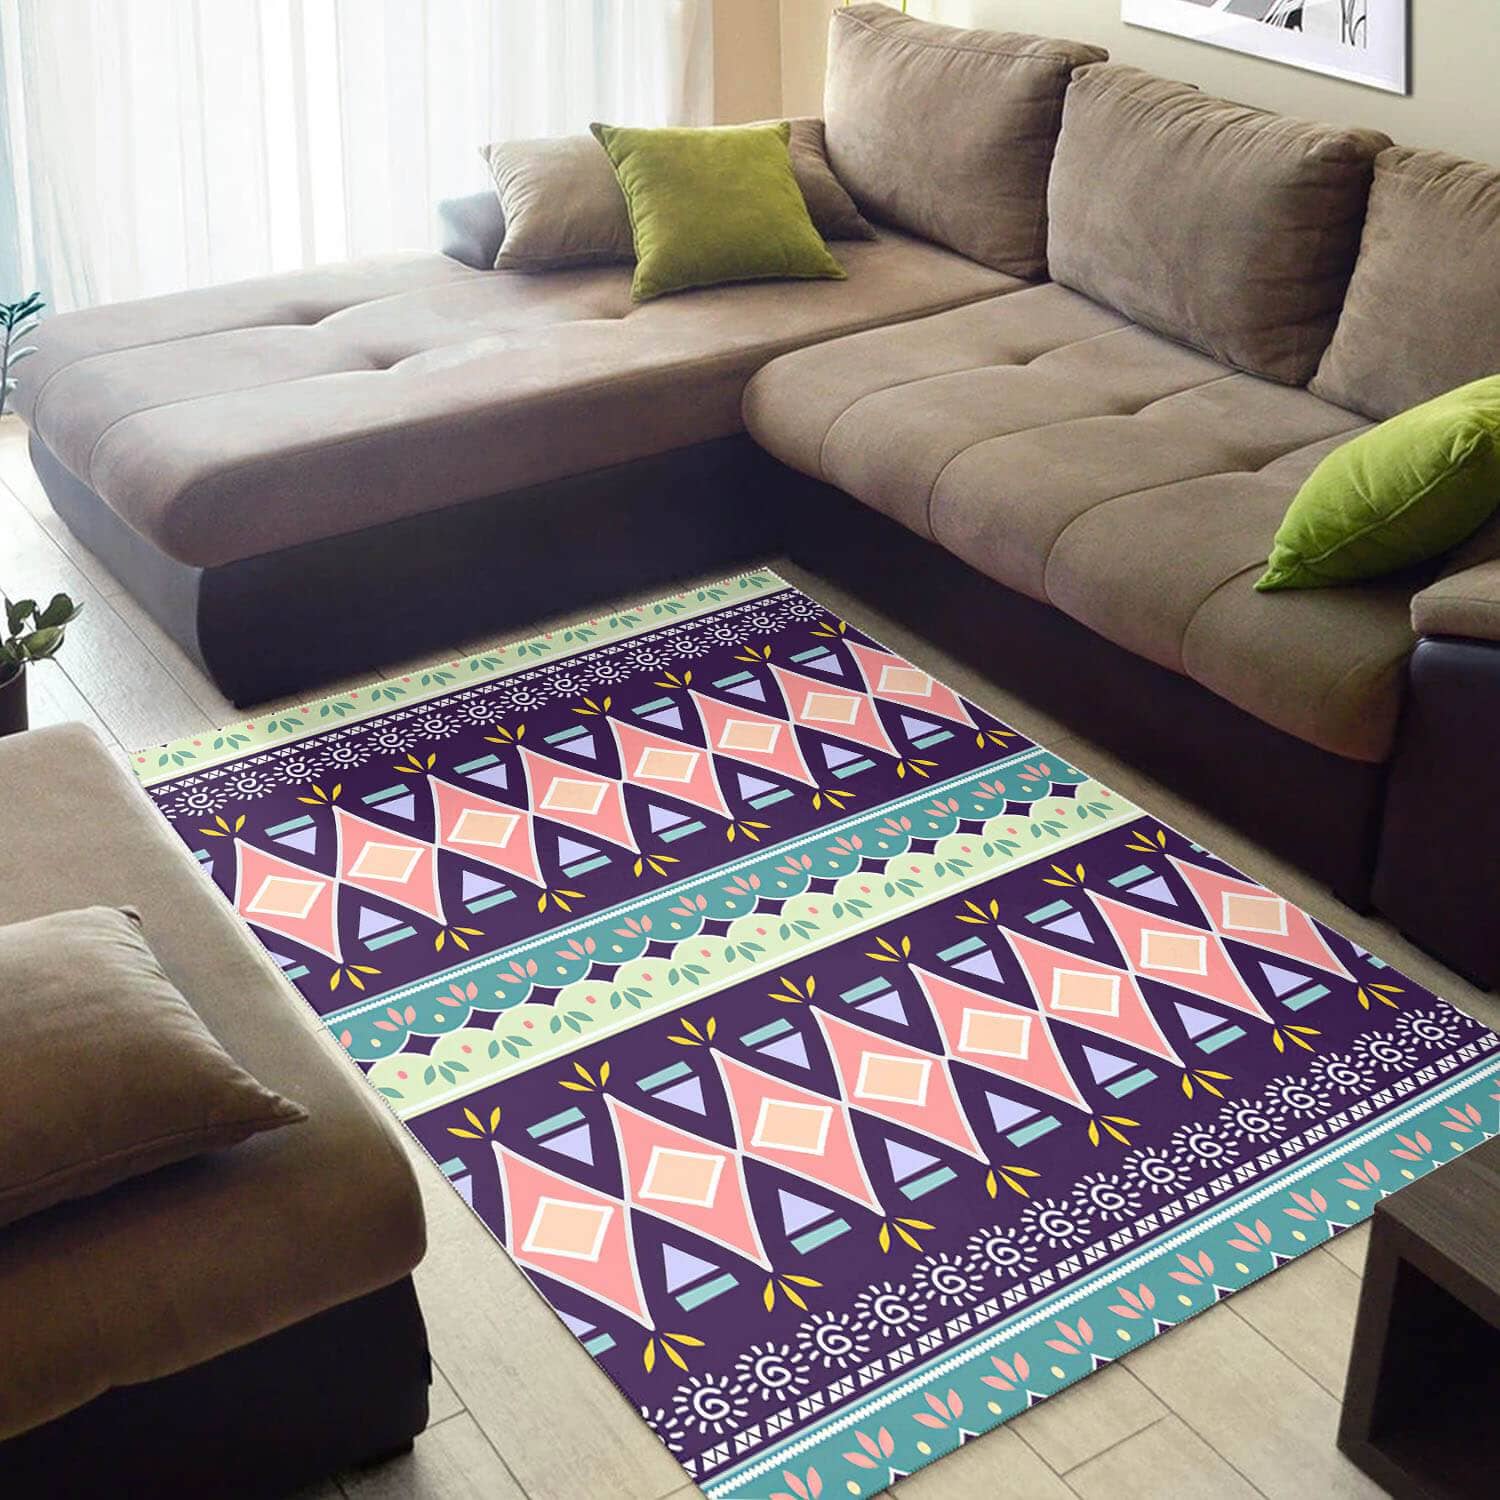 Inspired African Nice American Art Afrocentric Pattern Large Carpet Living Room Rug